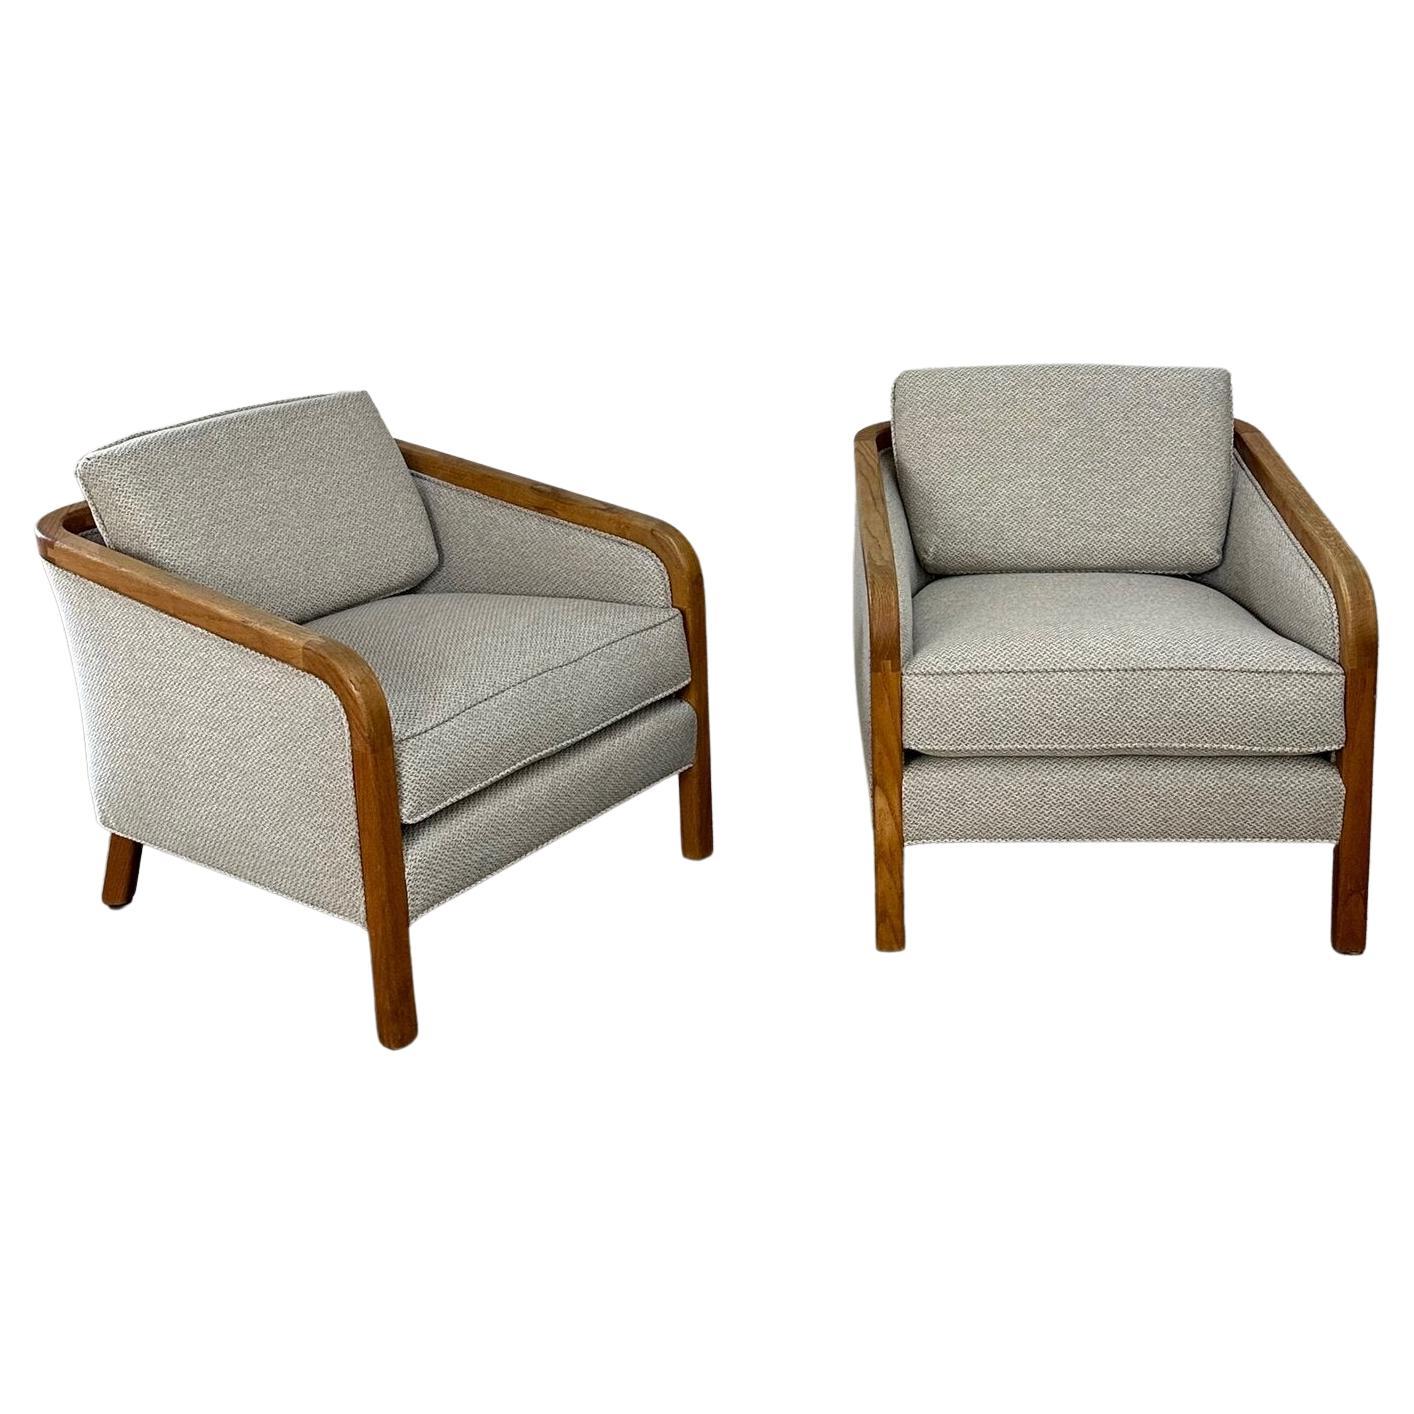 W28 D32 H25.5 SW23 SD20 SH18 AH23

Pair of fully restored lounge chairs with fresh tweed upholstery. Thick thick soft woven tweed shows in excellent condition with no rips or stains. Chair have very nice wooden frames with nice joinery and that